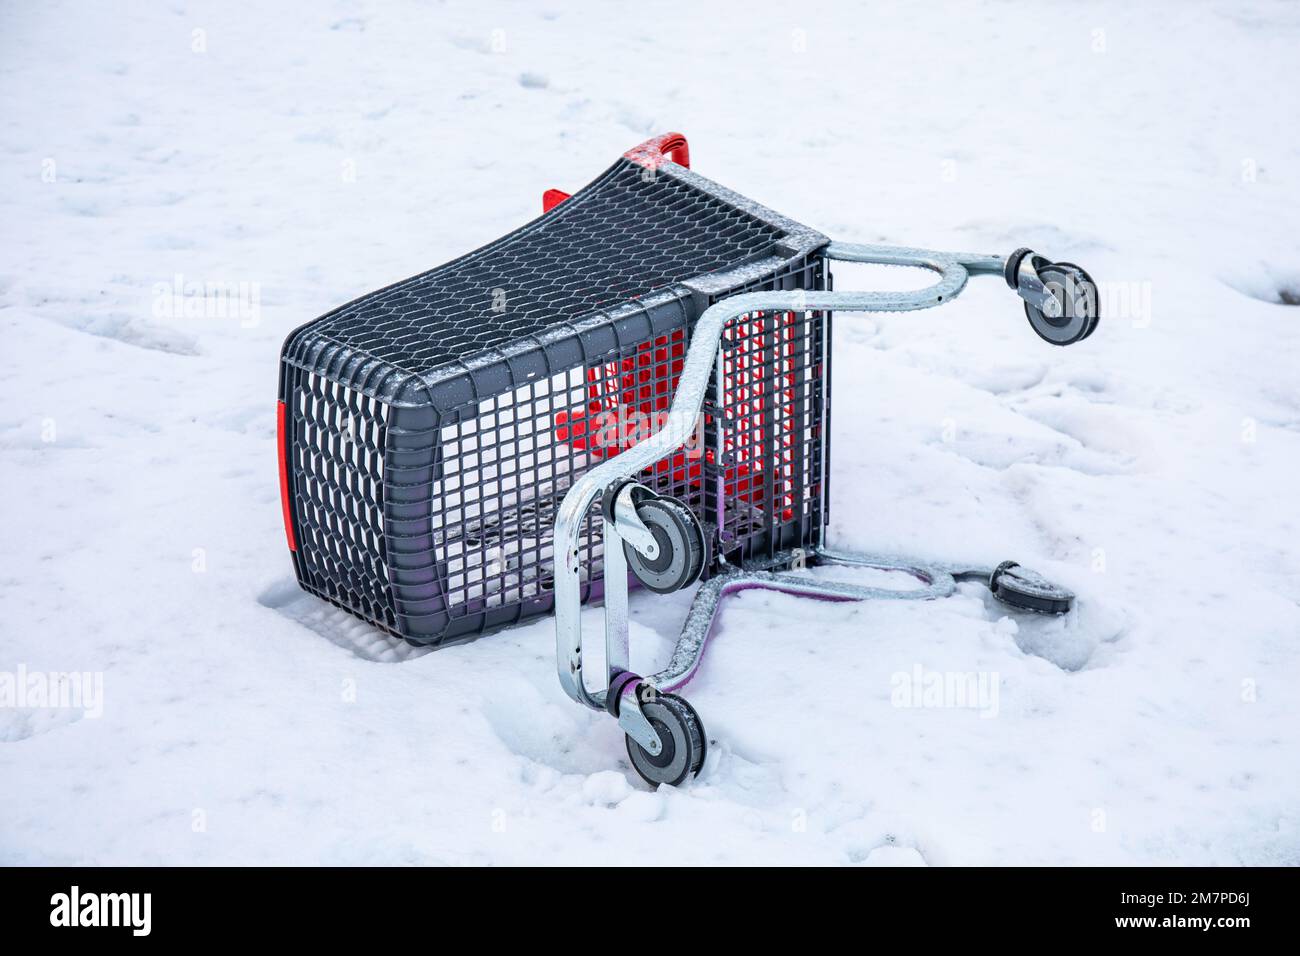 Overturned shopping cart of supermarket trolley in snow Stock Photo